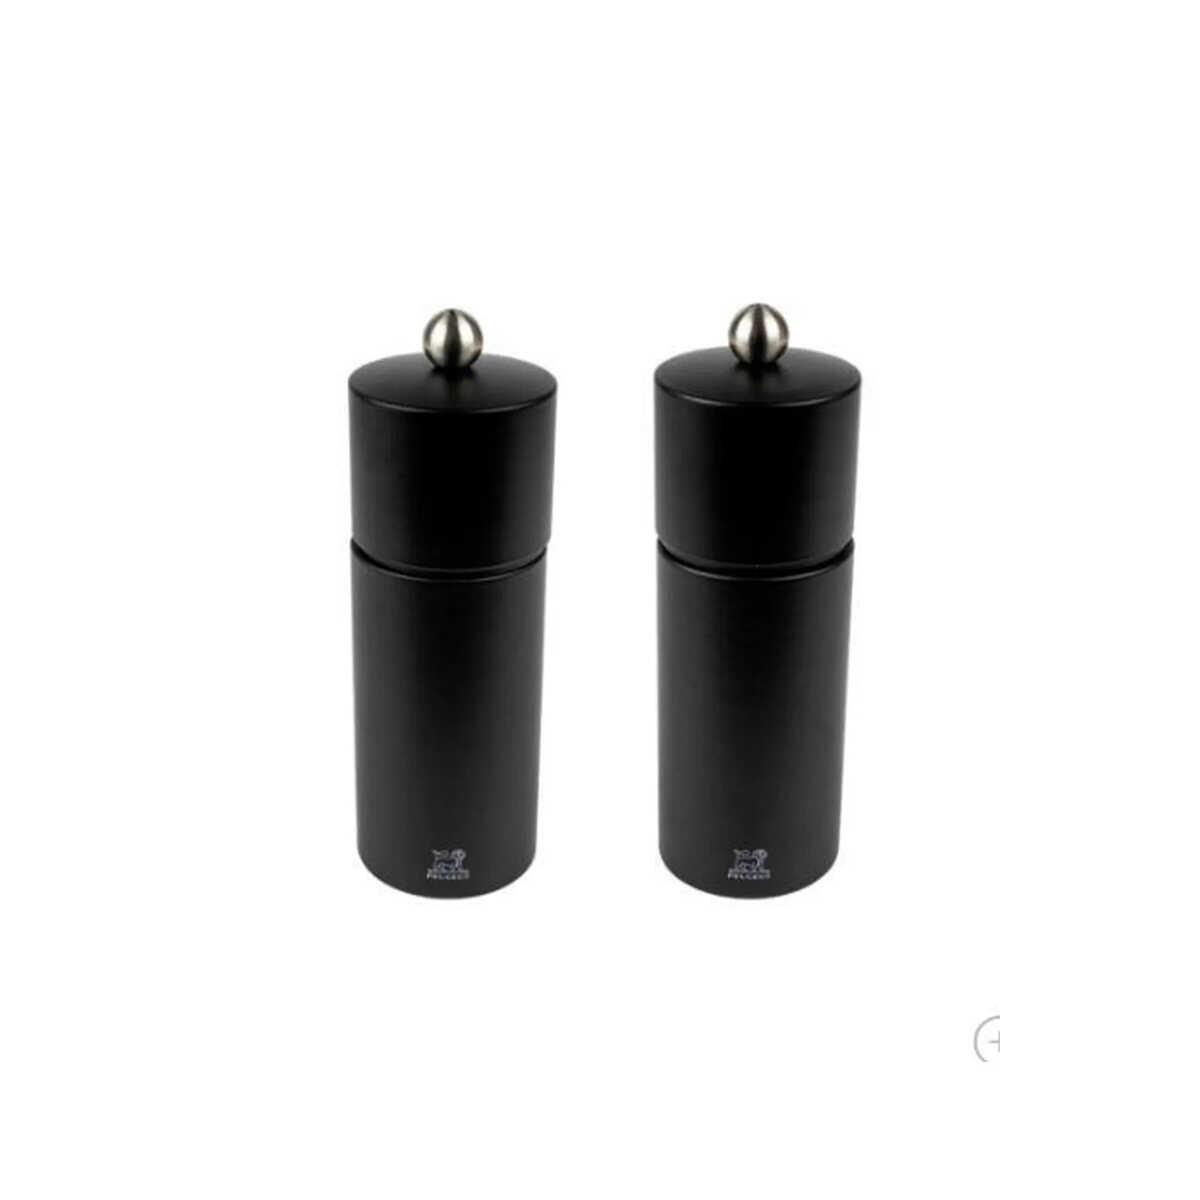 Peugeot Duo Chatel 2 pack Salt and Pepper Mill 16 Cm